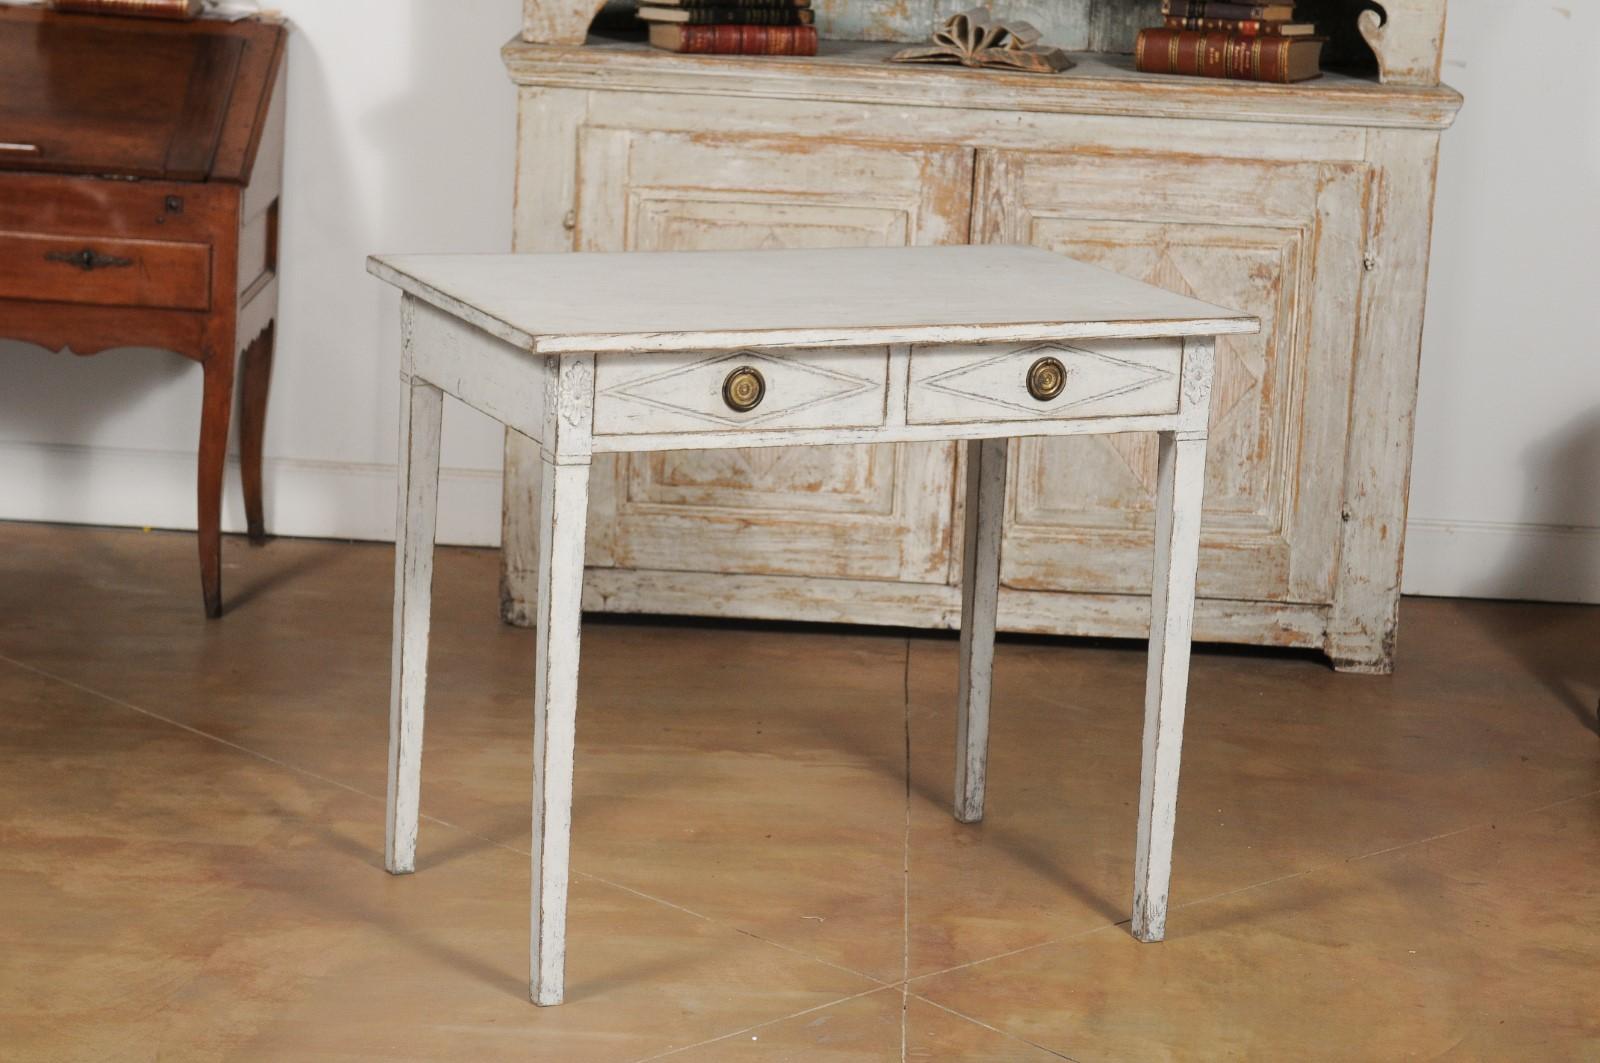 A Swedish Gustavian Style painted wood desk from the 20th century, with two drawers, diamond motifs and carved rosettes. Born in Sweden during the 20th century, this painted desk features a rectangular top sitting above two drawers, each carved with